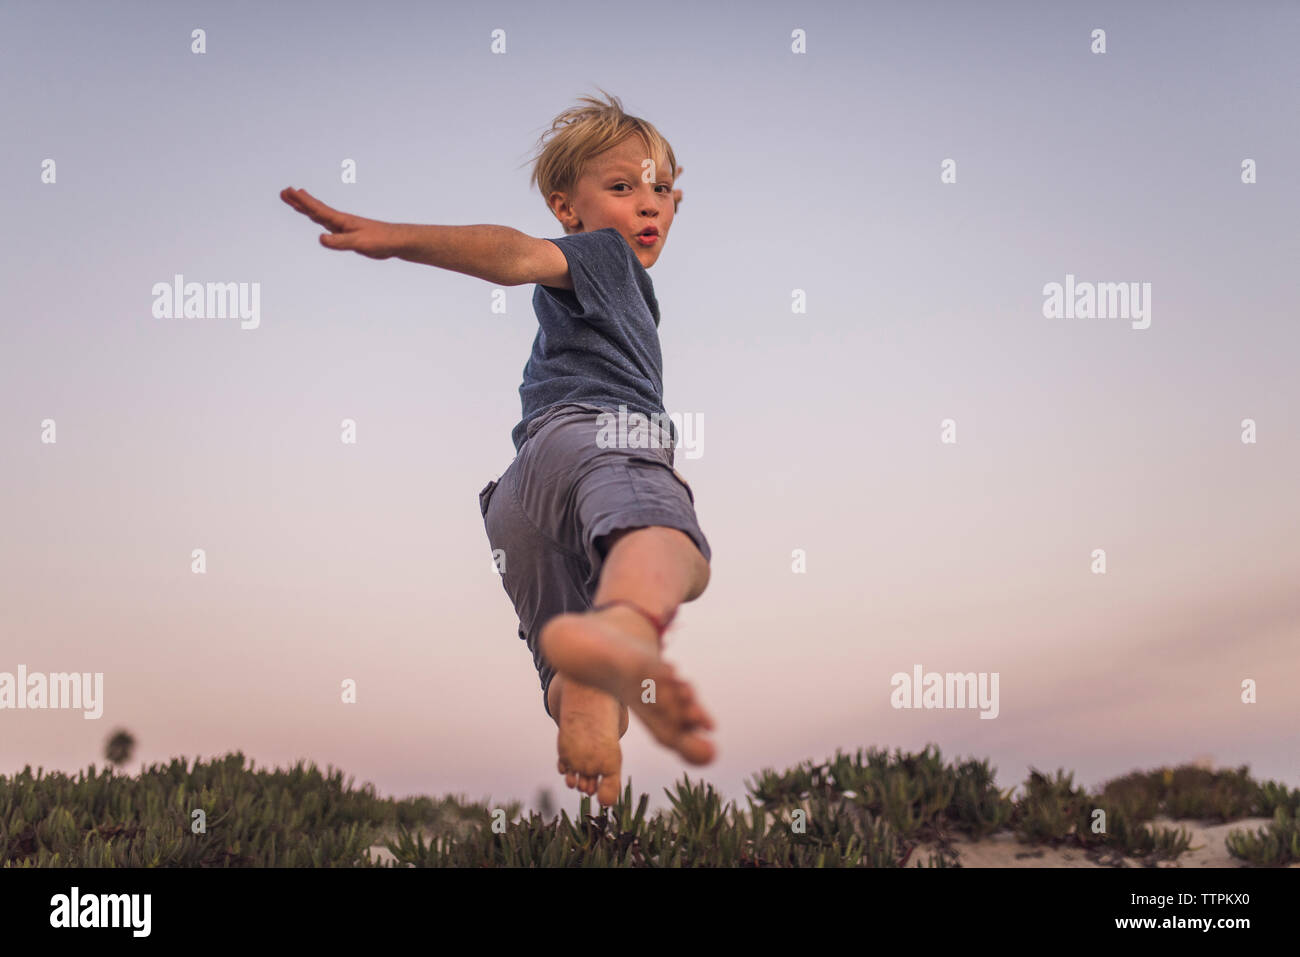 Low angle view of boy jumping on sand at beach against sky during sunset Stock Photo